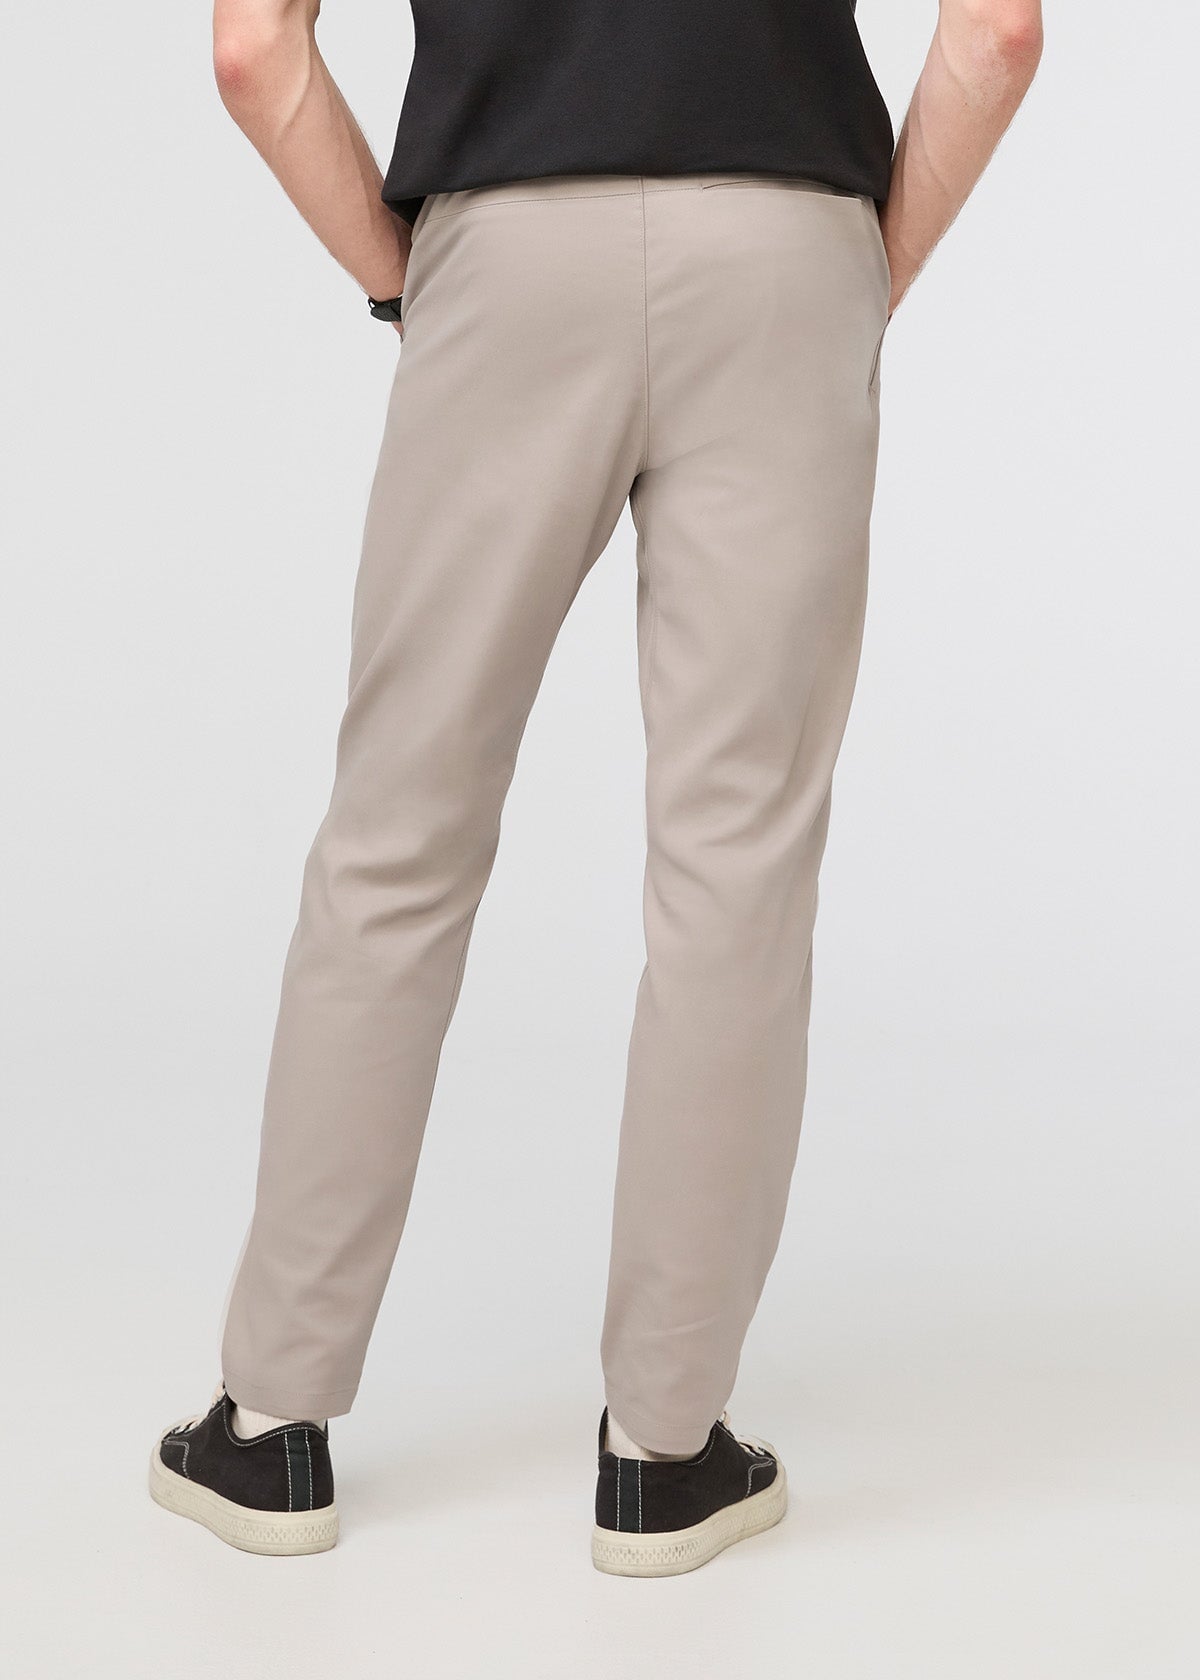 Outpost Makers Slim Straight Stretch Pant - Men's Pants in Khaki | Buckle